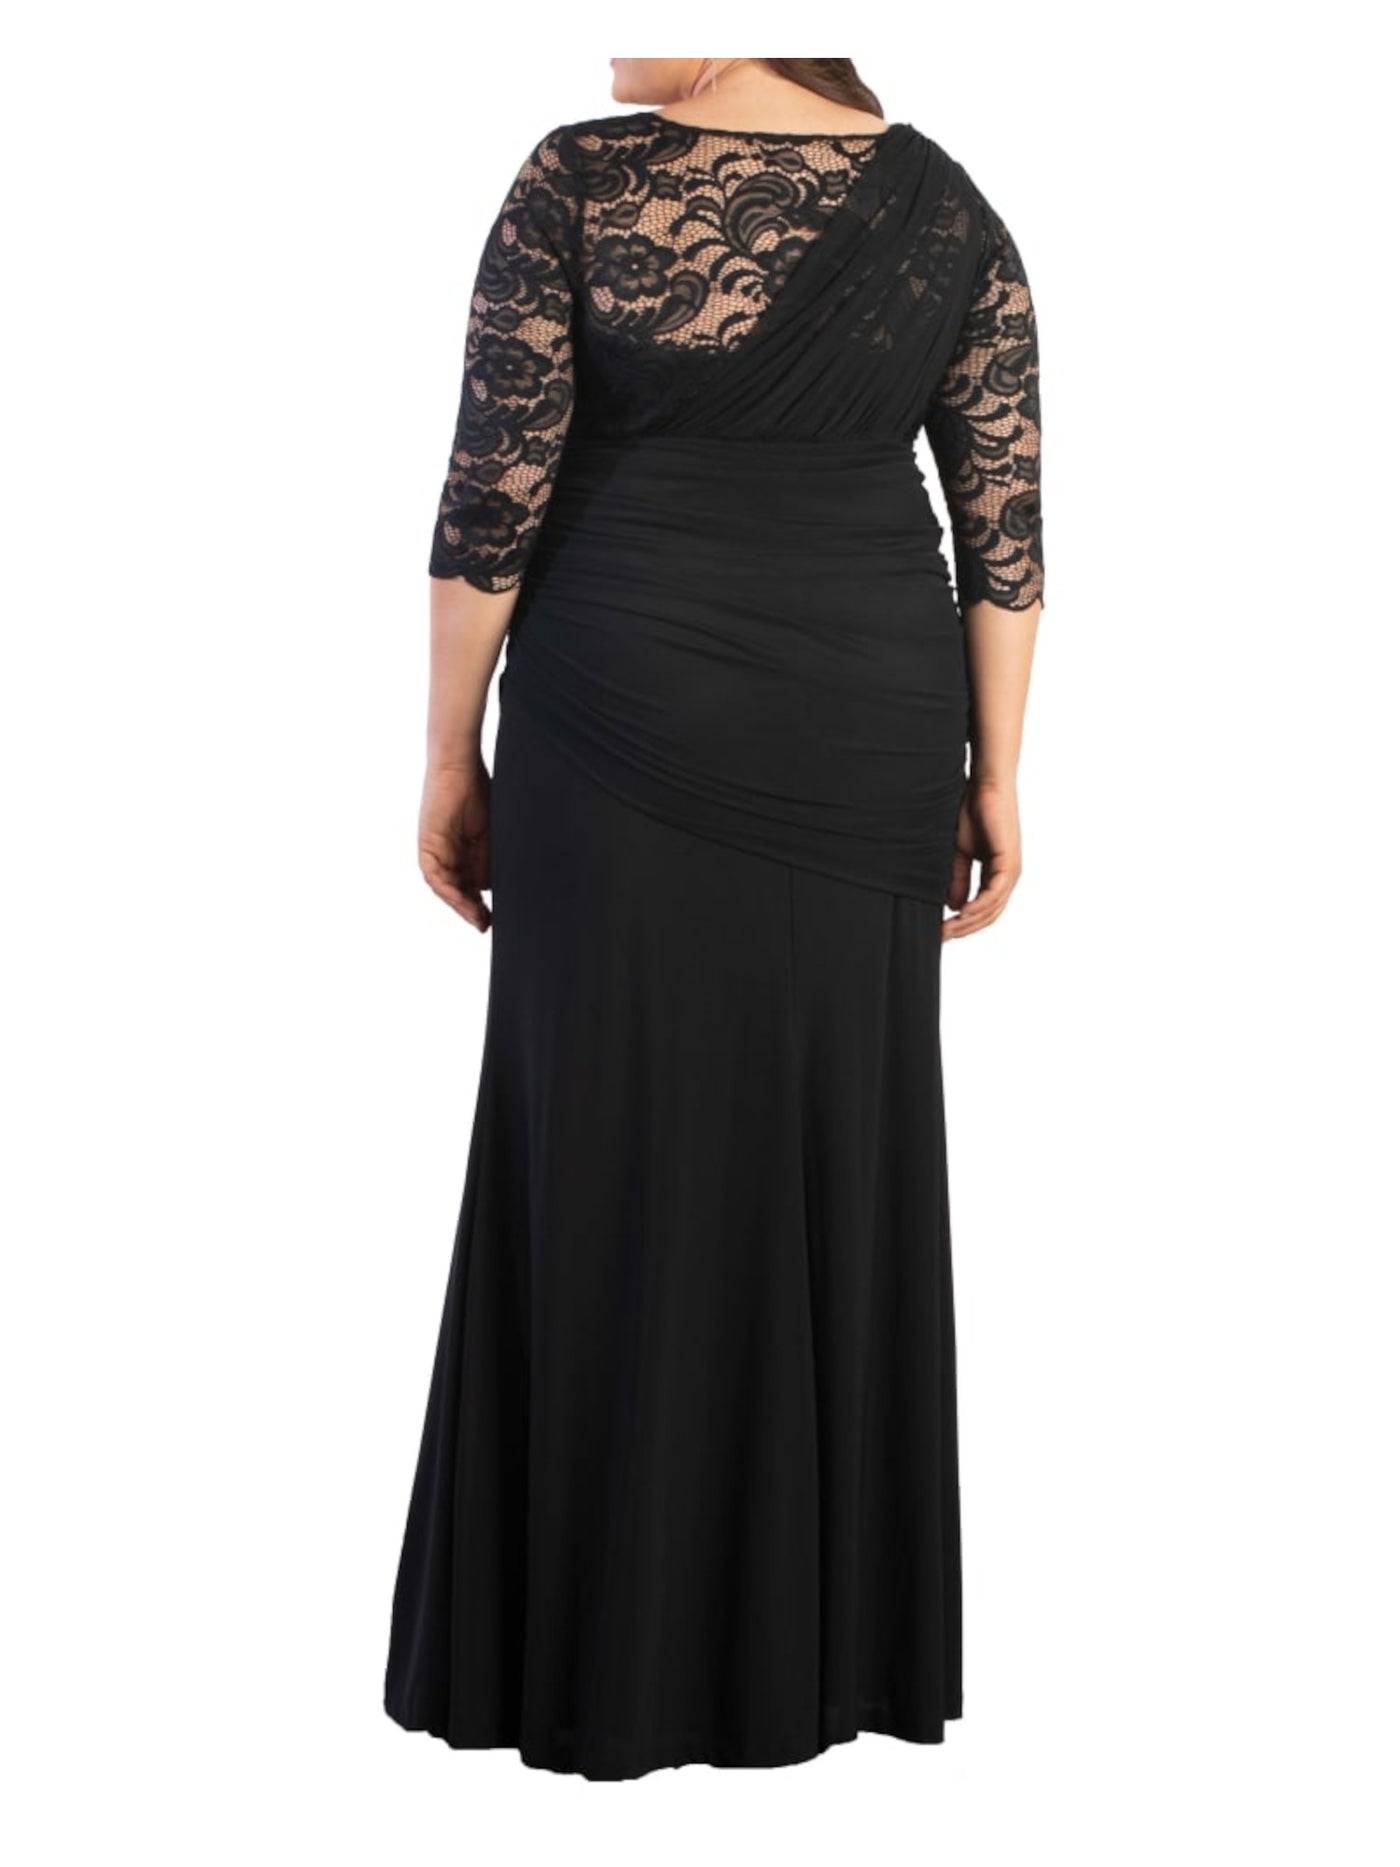 KIYONNA Womens Black Ruched Lace Sheer Lined Pullover 3/4 Sleeve V Neck Full-Length Evening Gown Dress Plus 2X